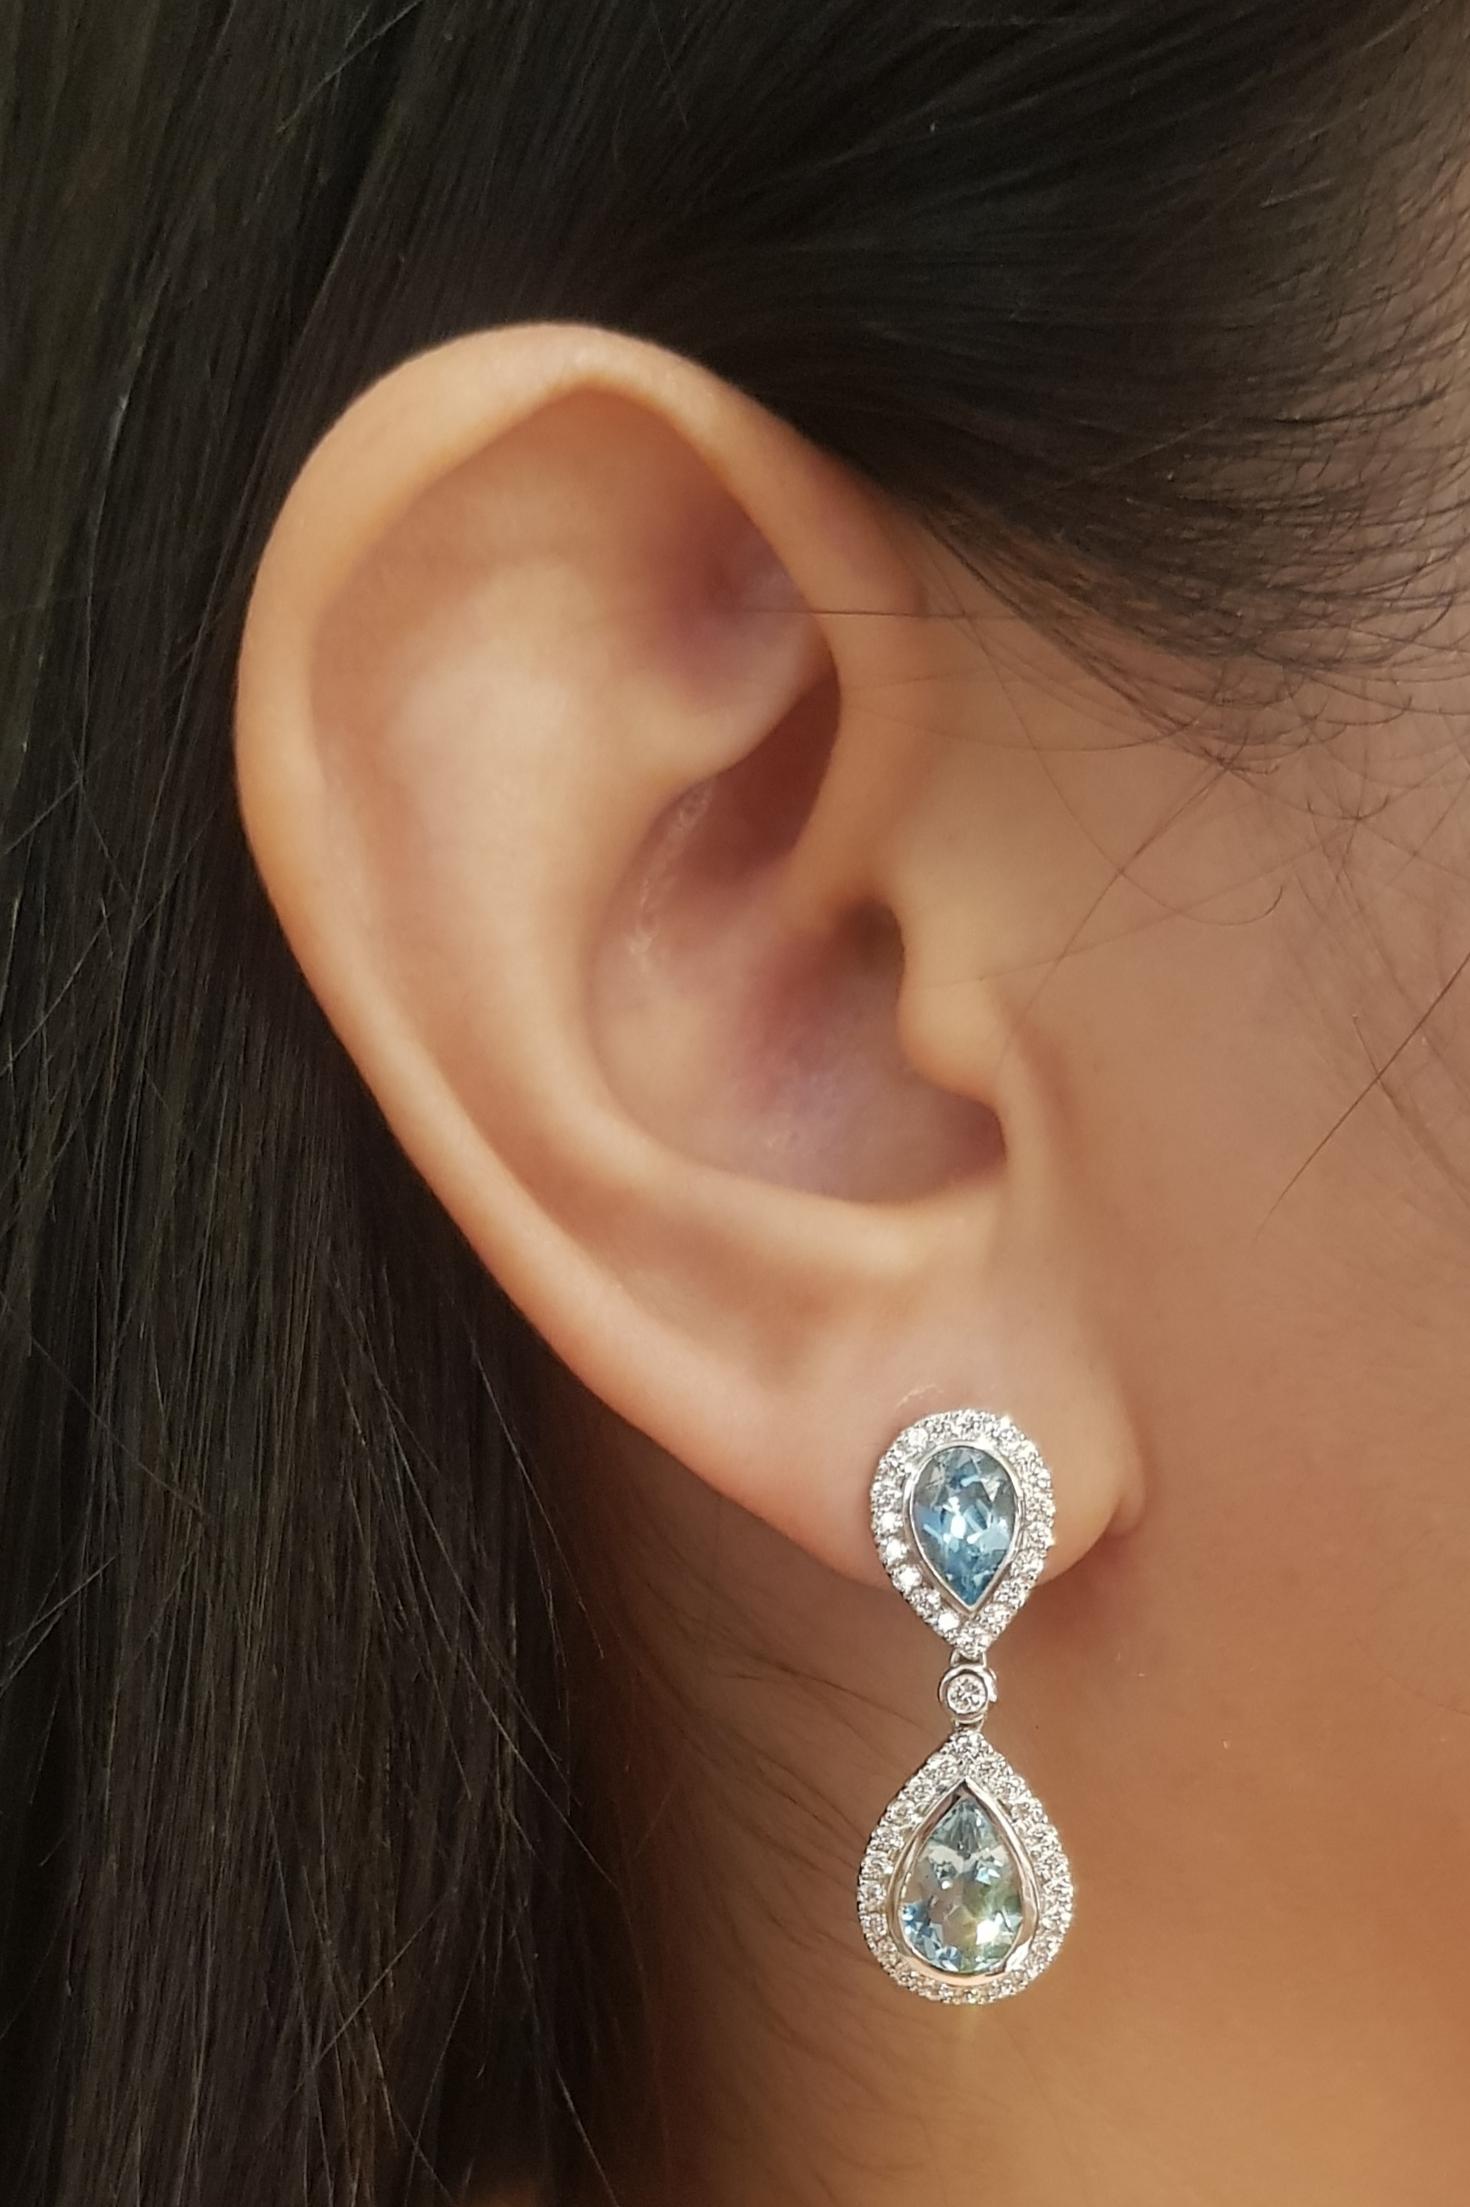 Aquamarine 3.59 carats with Diamond 0.88 carat Earrings set in 18K White Gold Settings

Width: 1.0 cm 
Length: 3.0 cm
Total Weight: 10.47 grams

